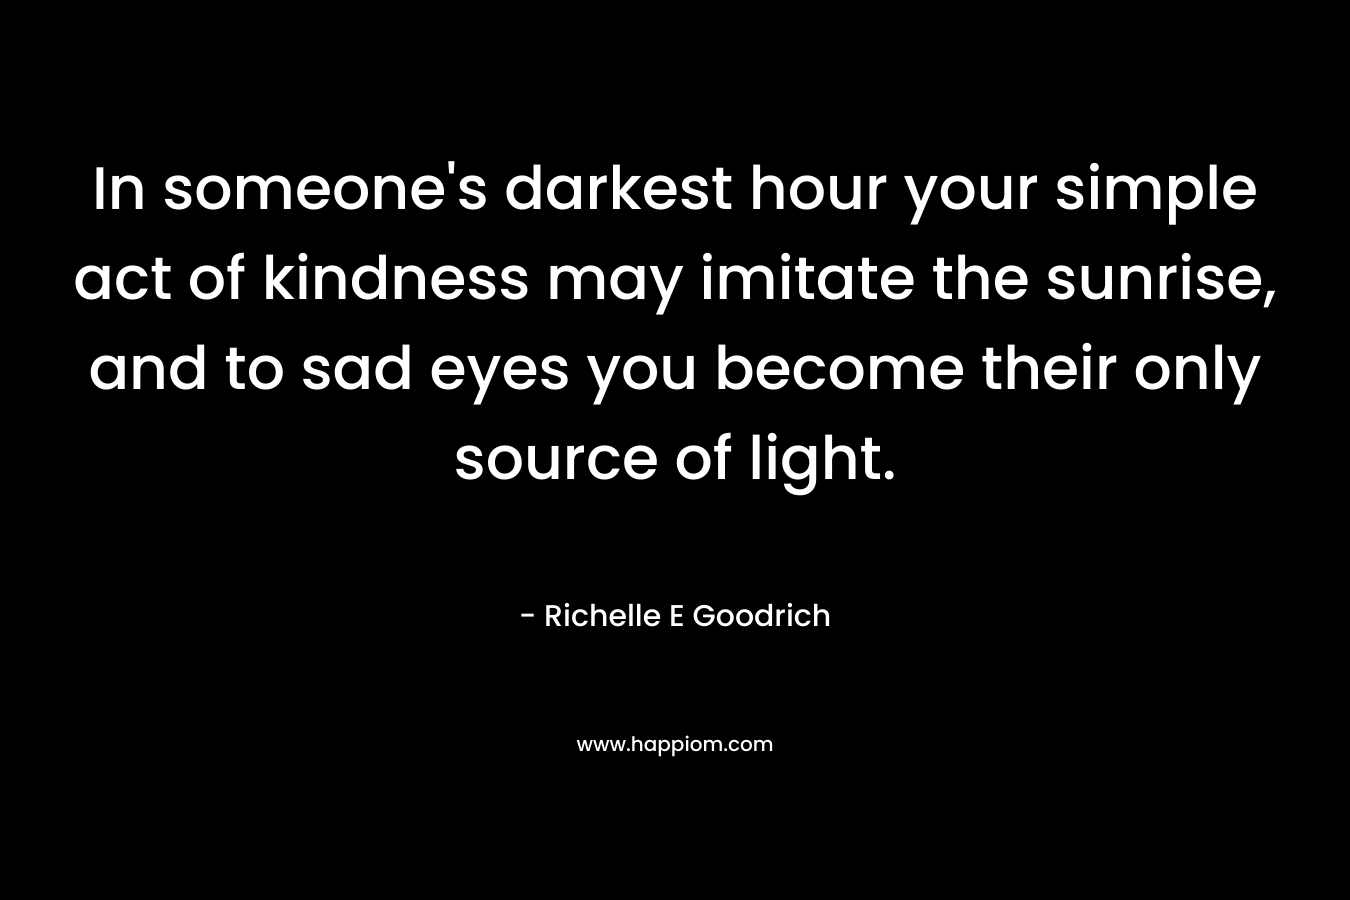 In someone's darkest hour your simple act of kindness may imitate the sunrise, and to sad eyes you become their only source of light.